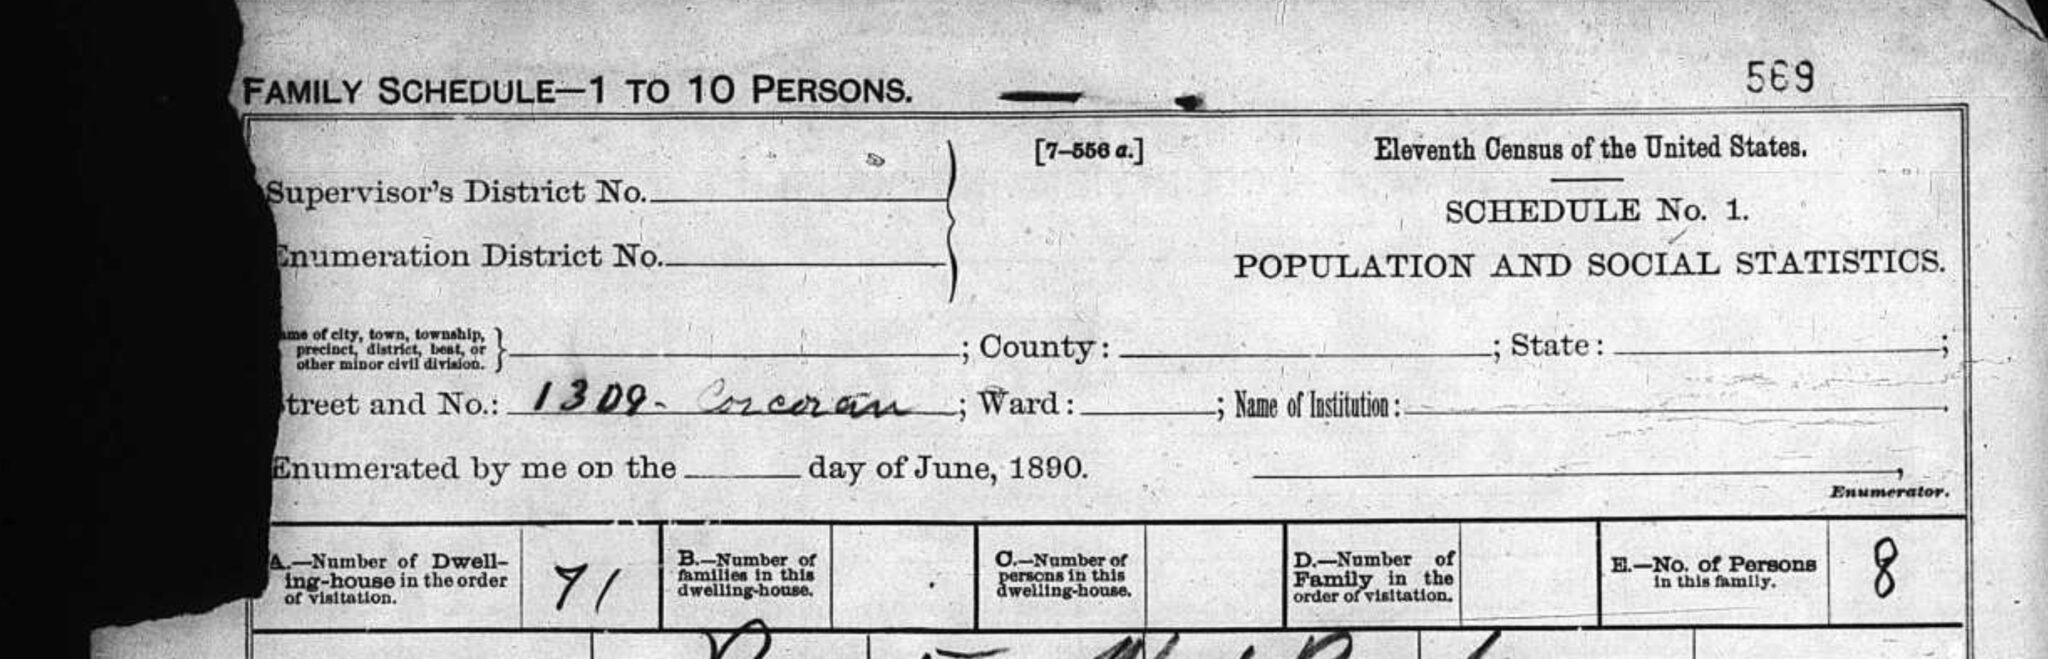 What Were Your Ancestors Doing in the 1890s?